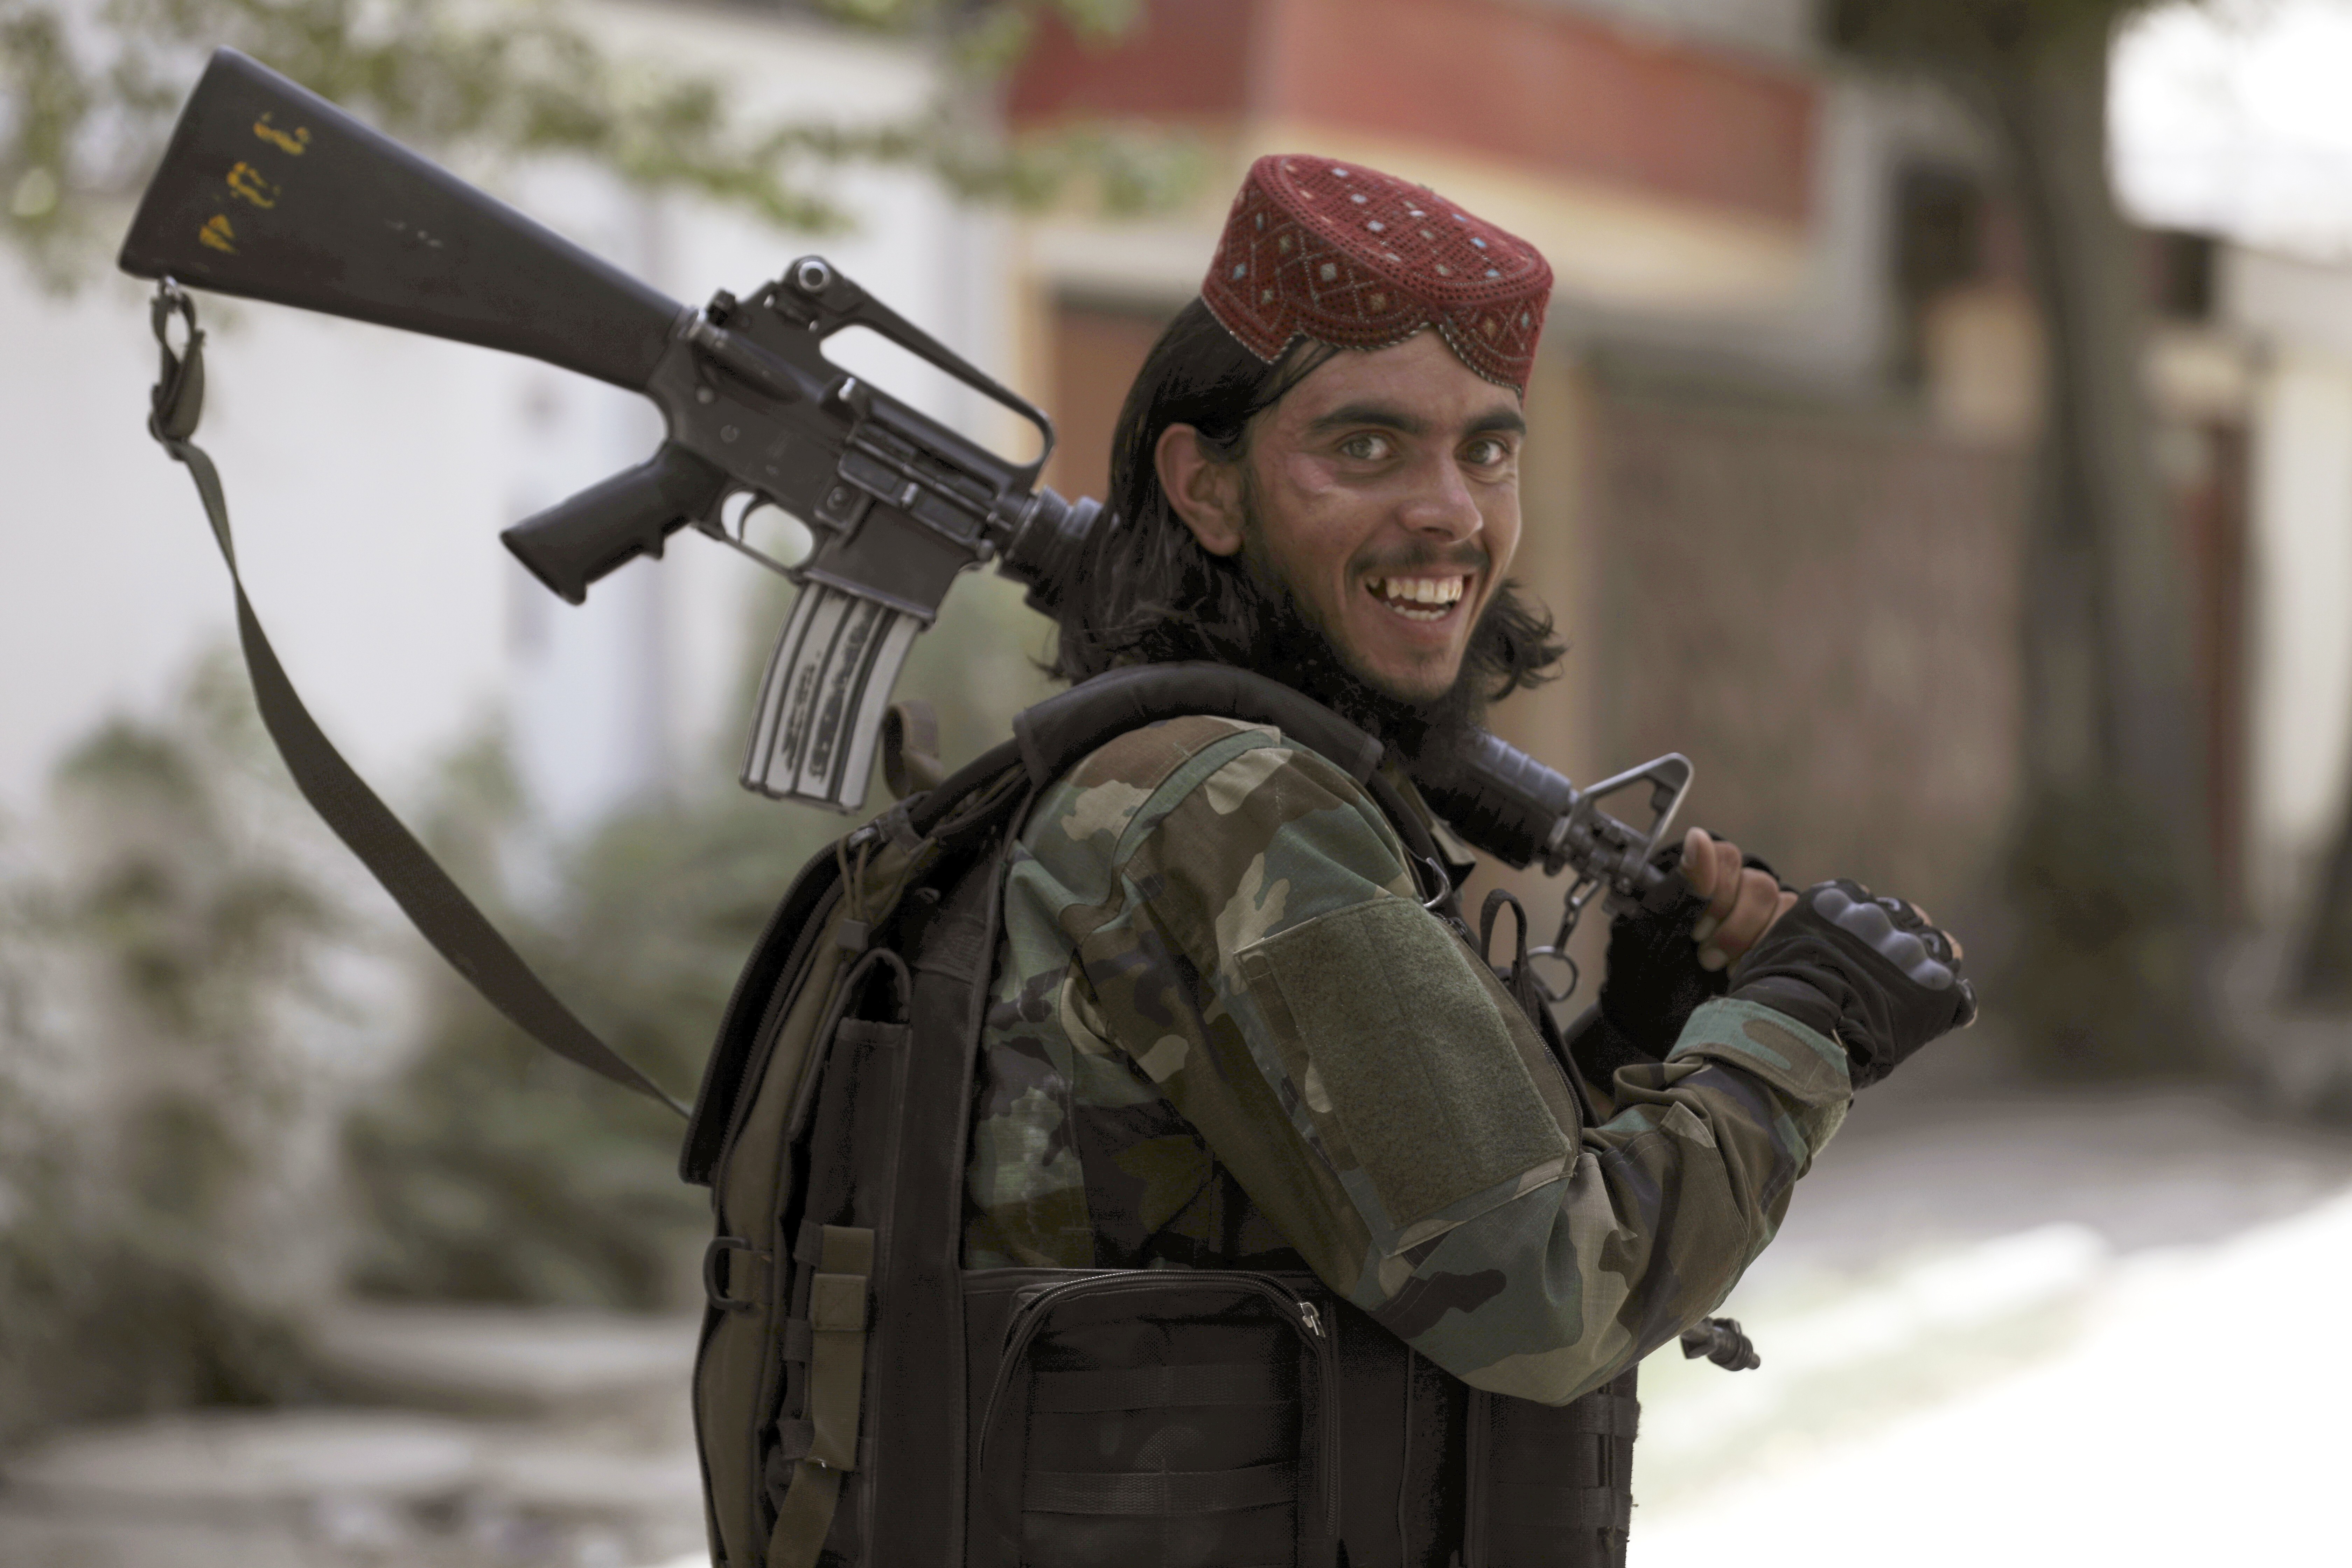 A Taliban fighter in Kabul, Afghanistan. Photo: AP